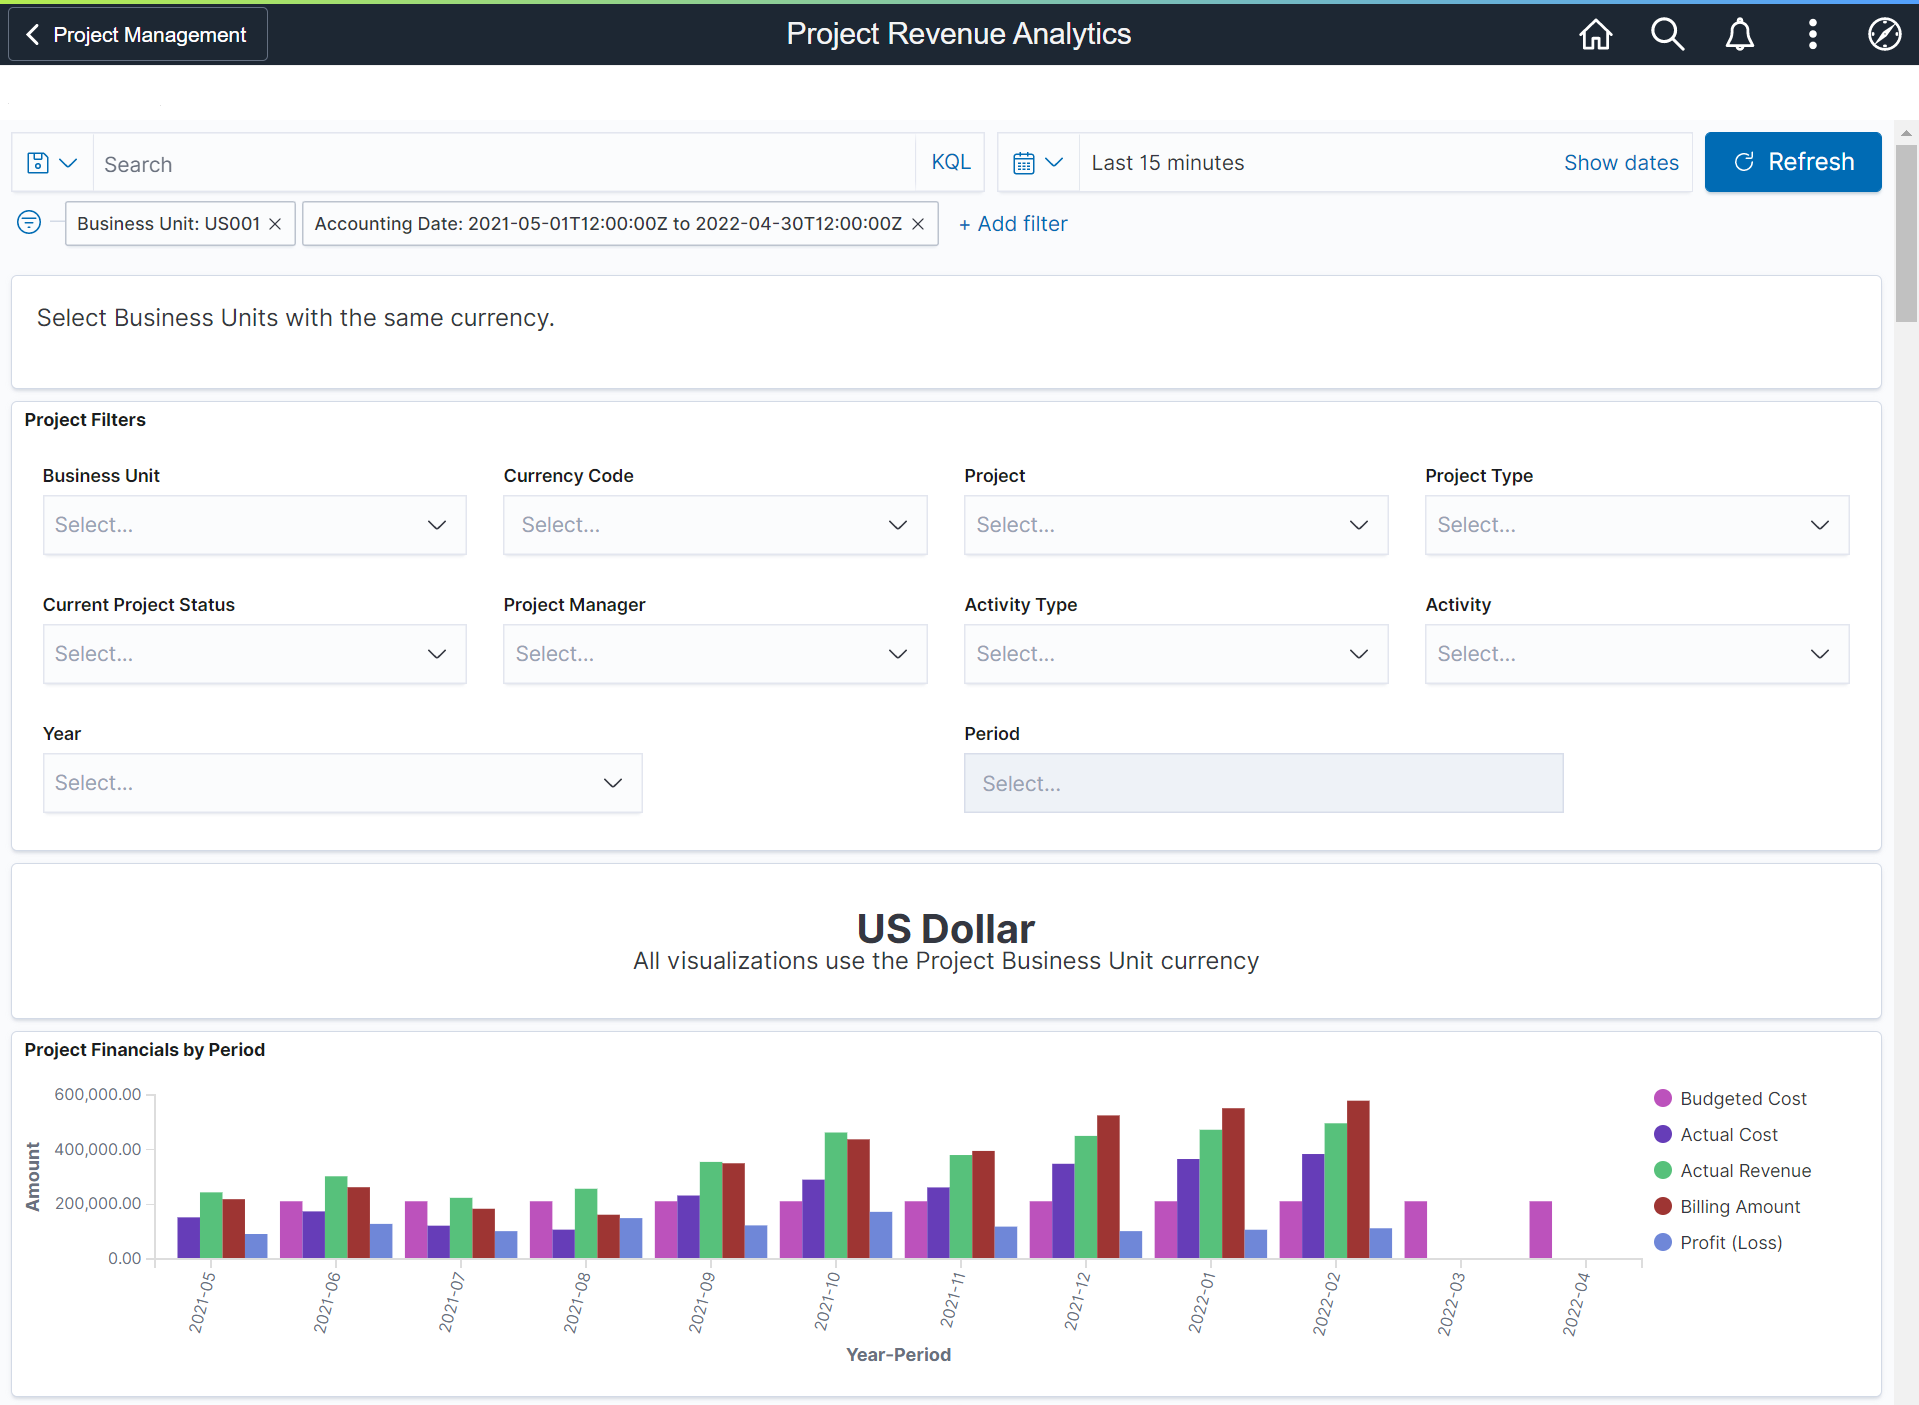 Project Revenue Analytics Dashboard (1 of 2)